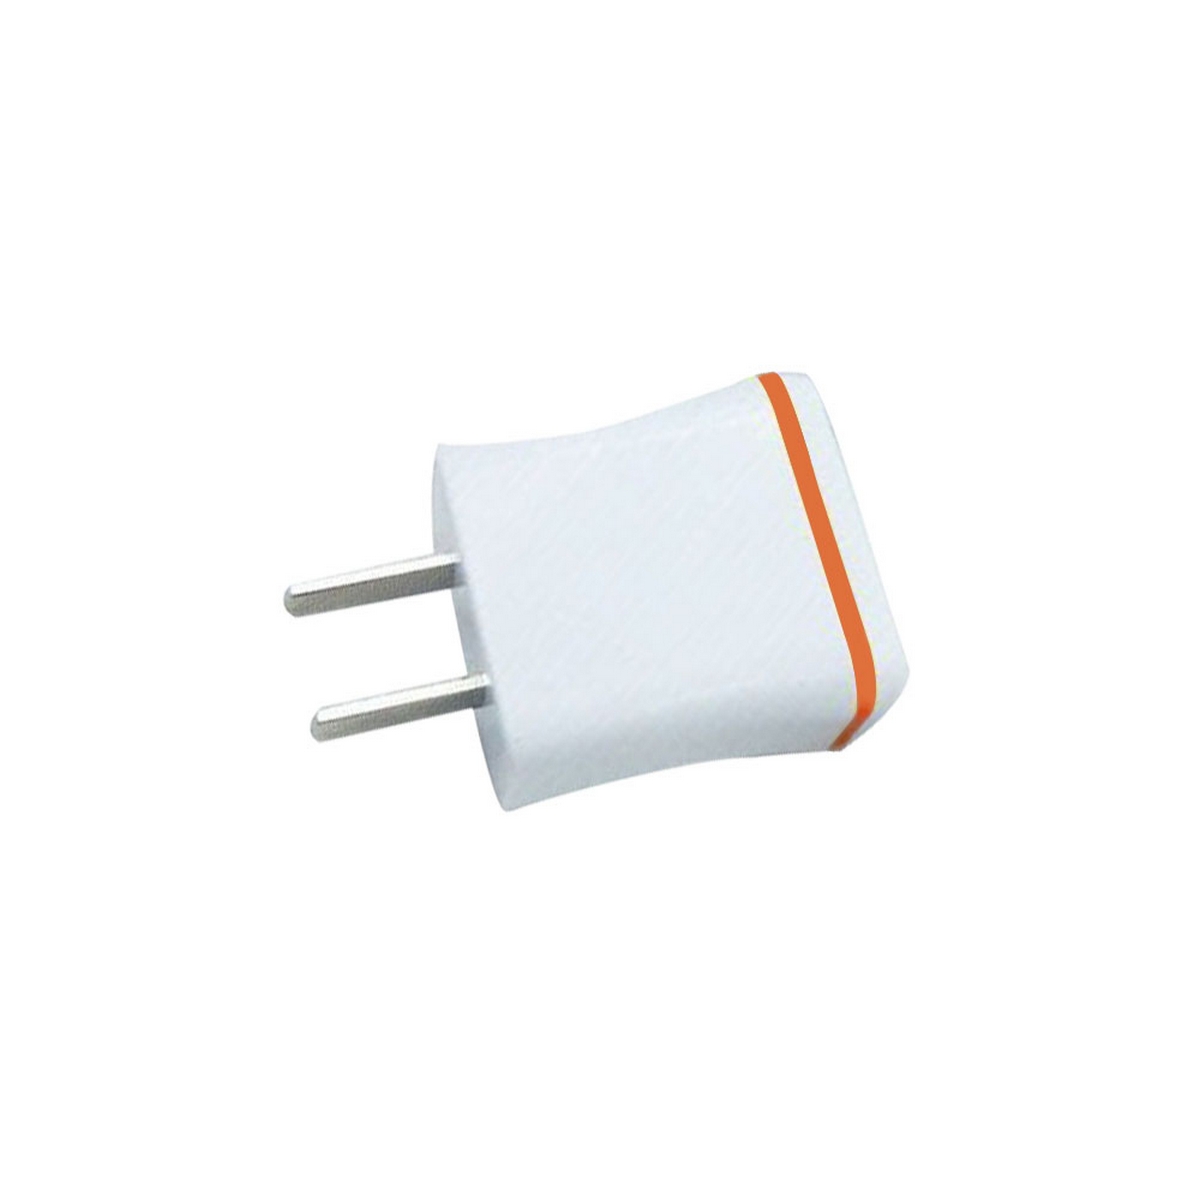 A/C Adapter USB Wall Charger